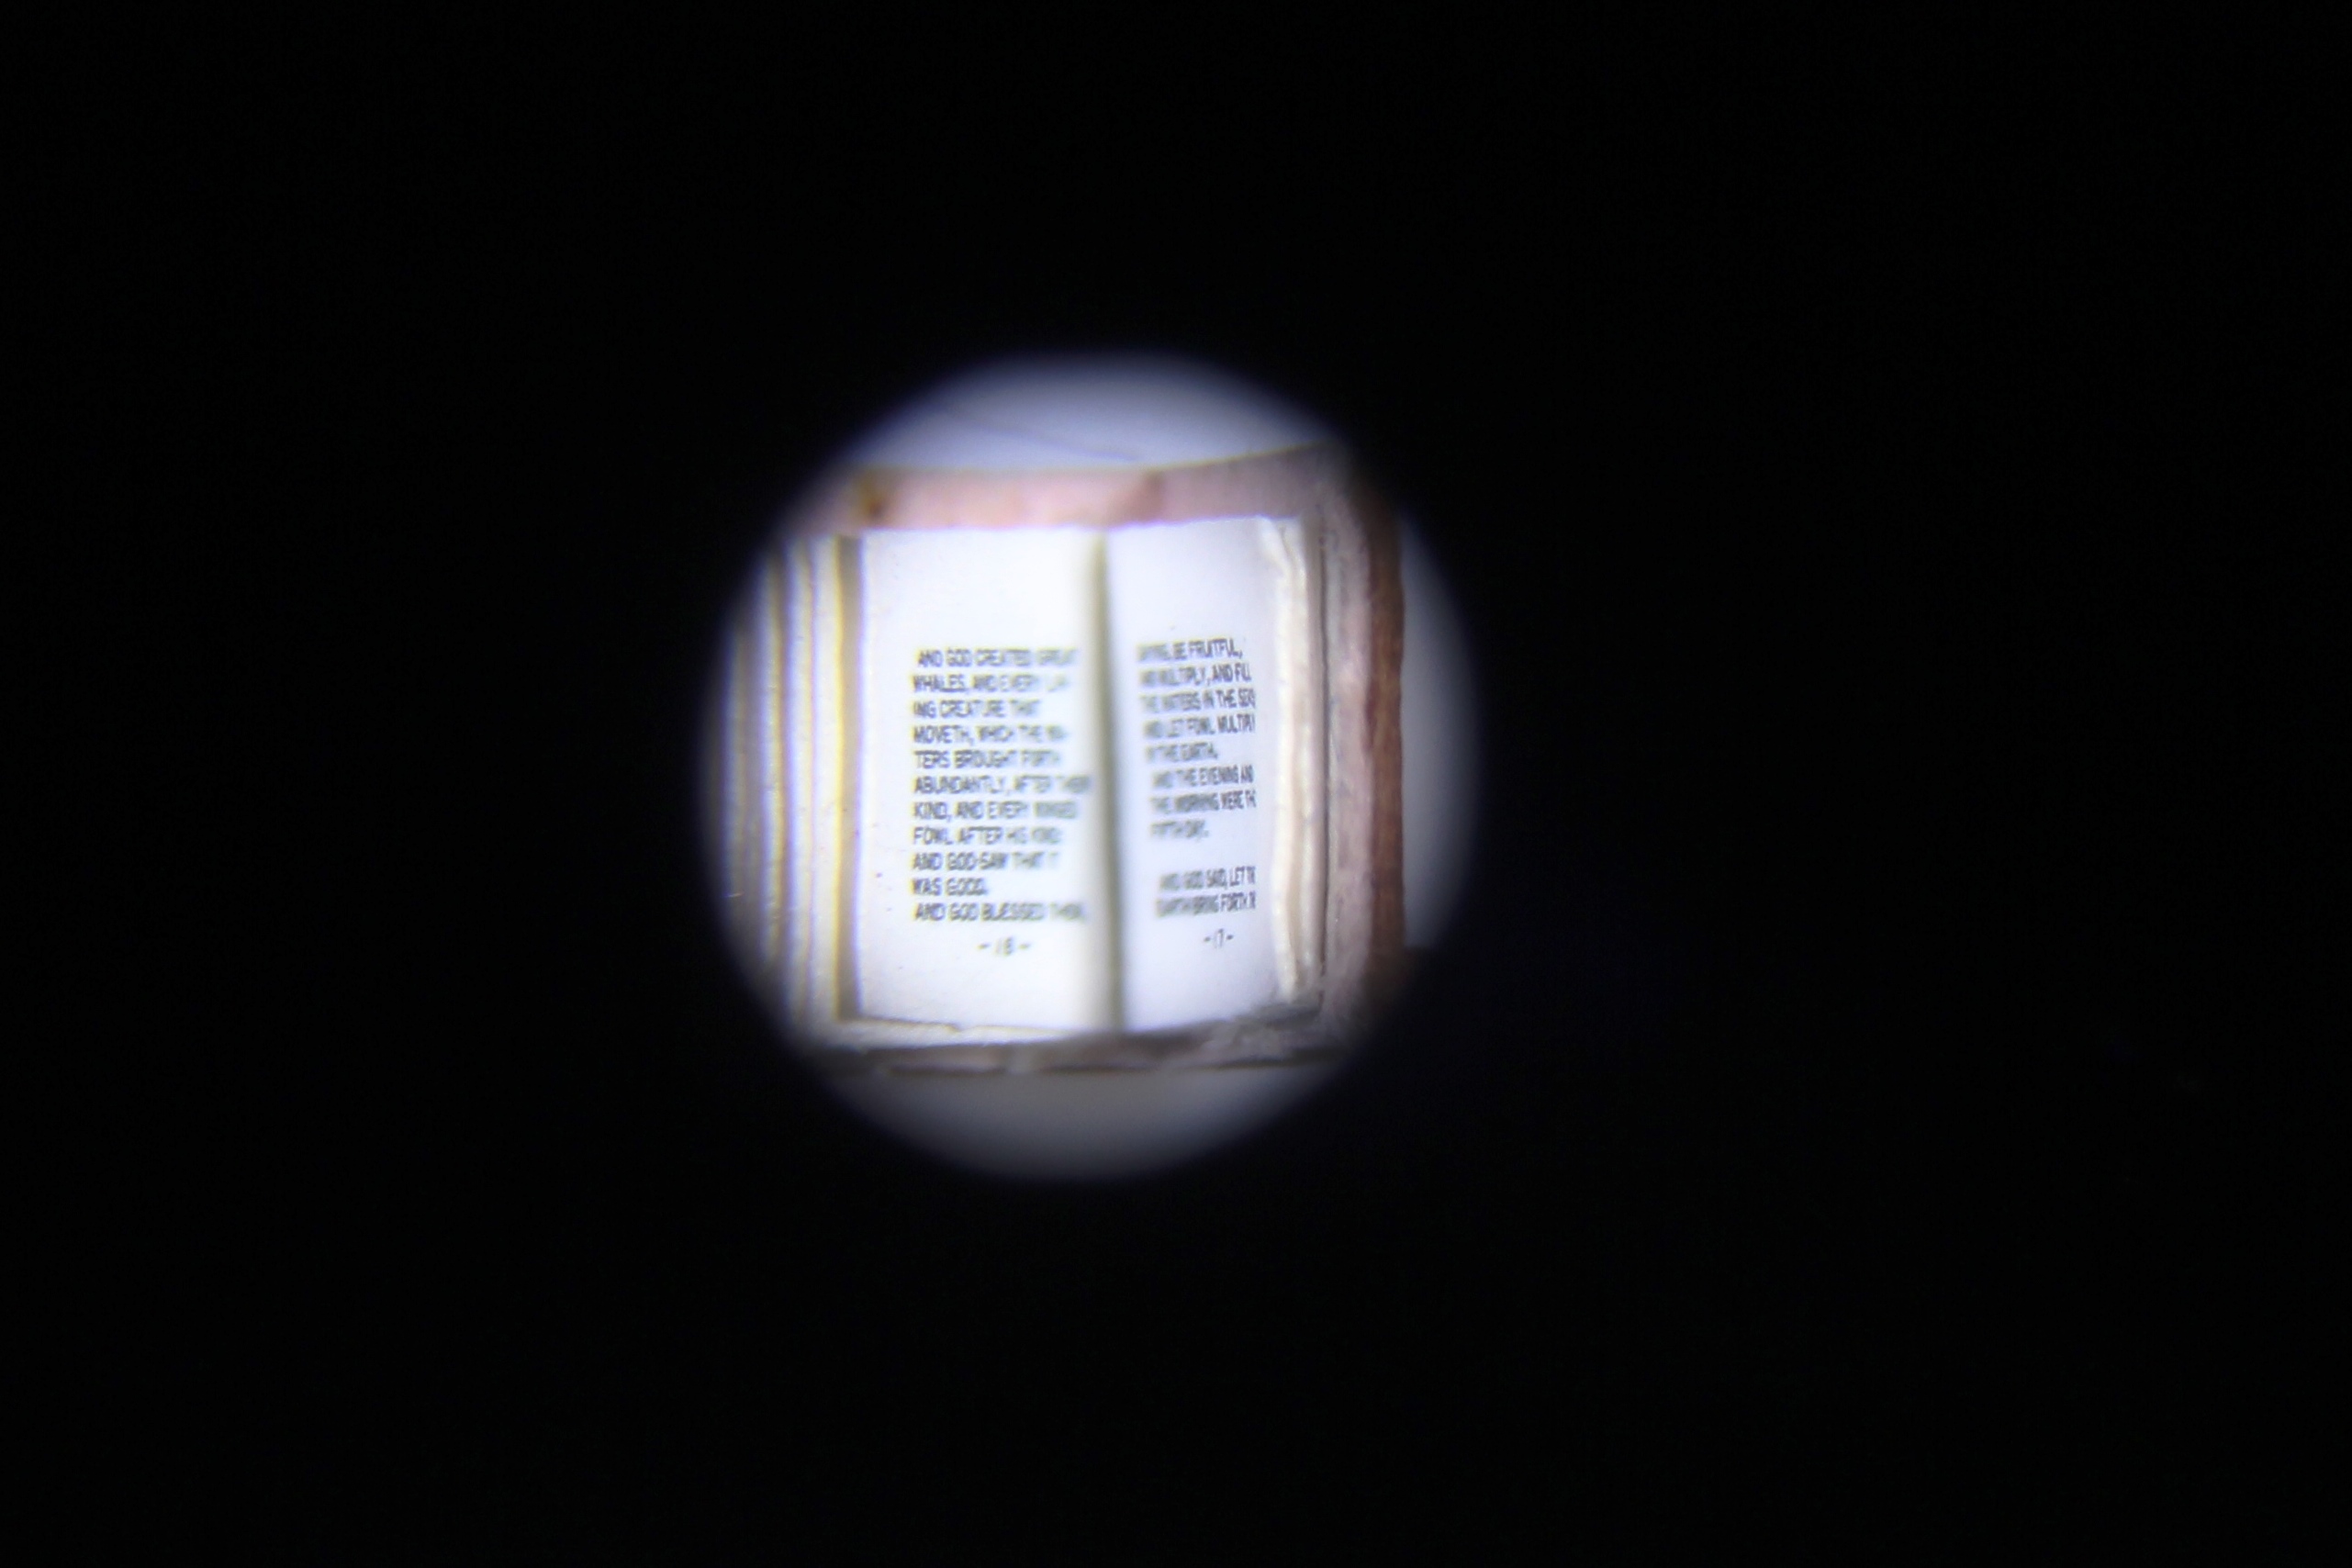 Text viewed under the microscope